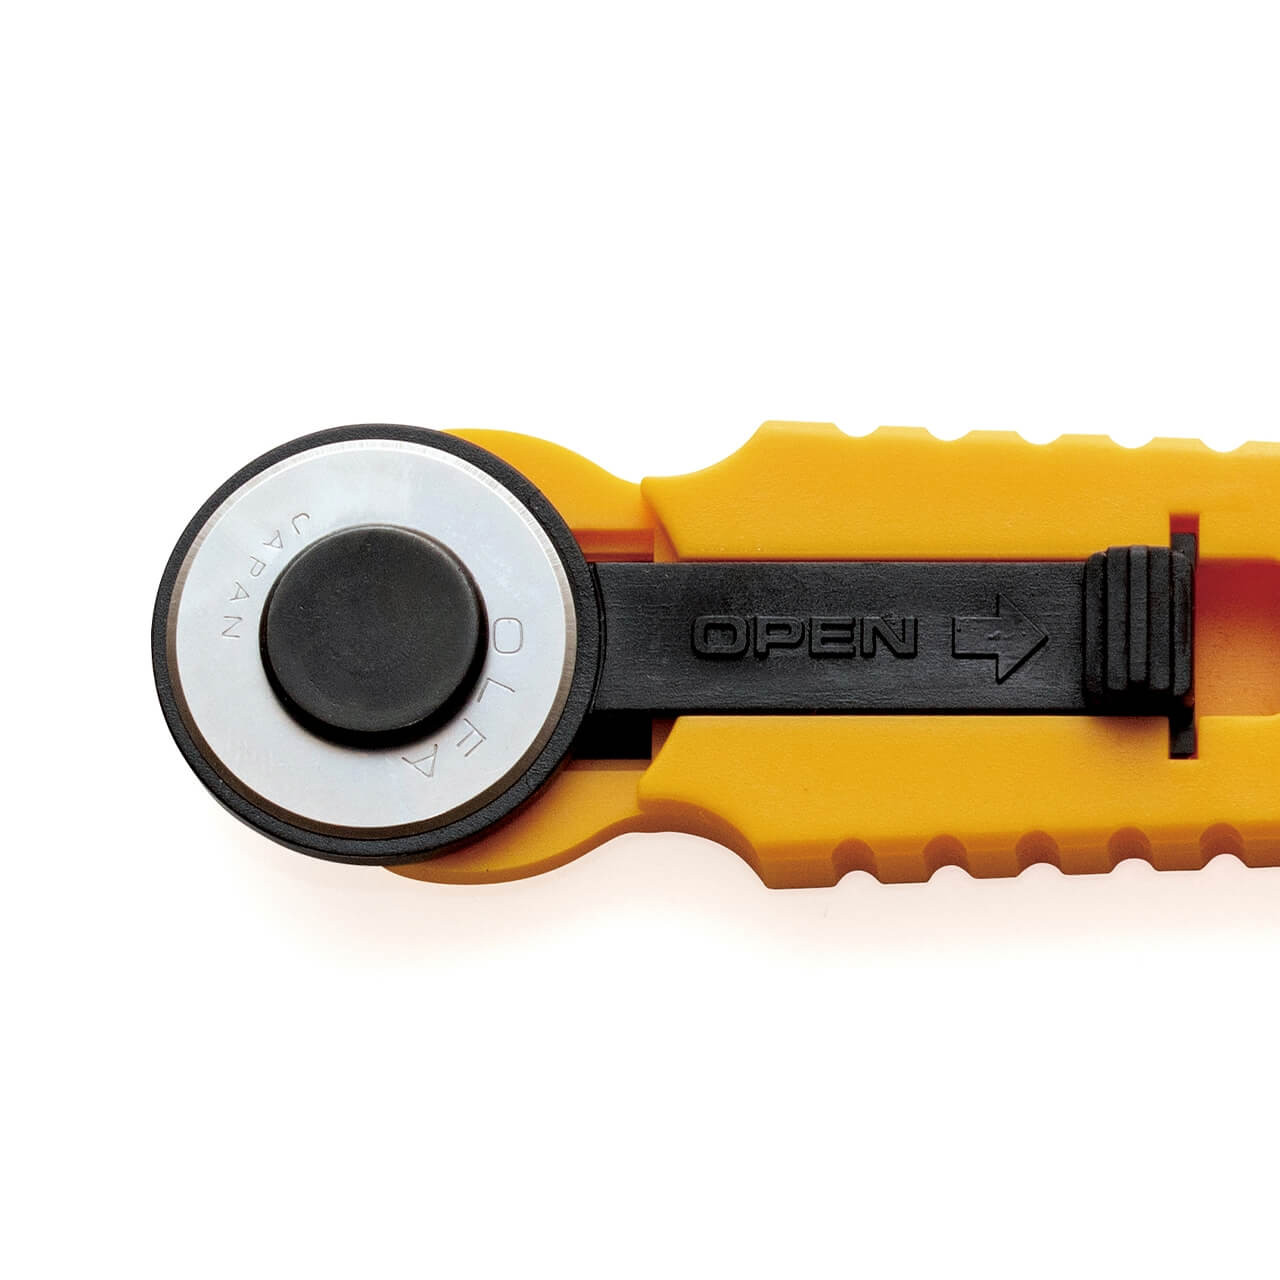 Close up view of the OLFA 18mm Quick-Change Rotary Cutter with a vibrant yellow handle, black grip, and silver blade